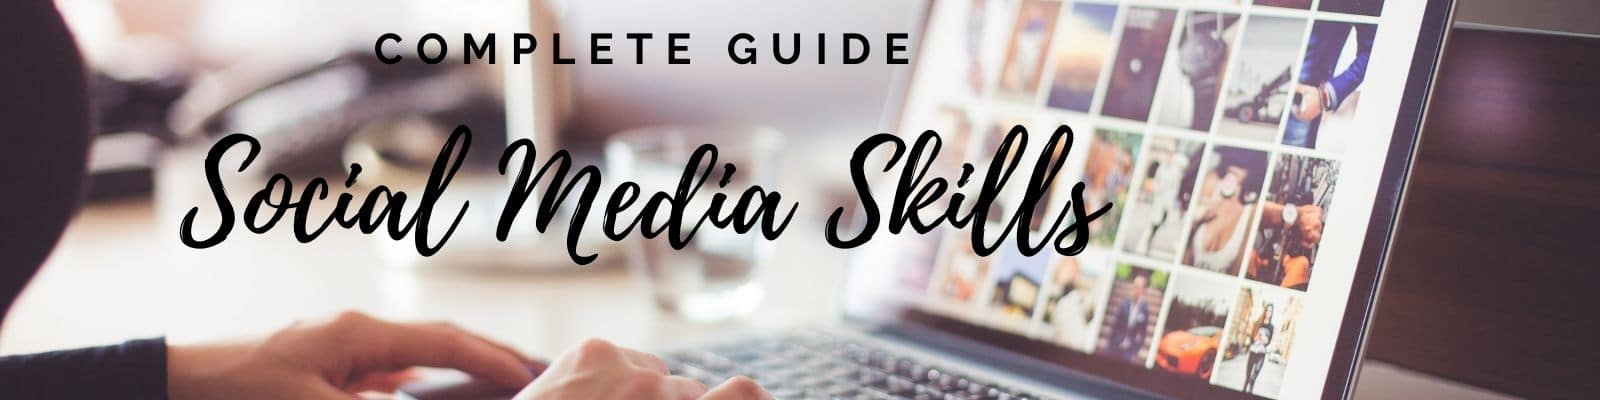 Complete guide to social media skills-7boats